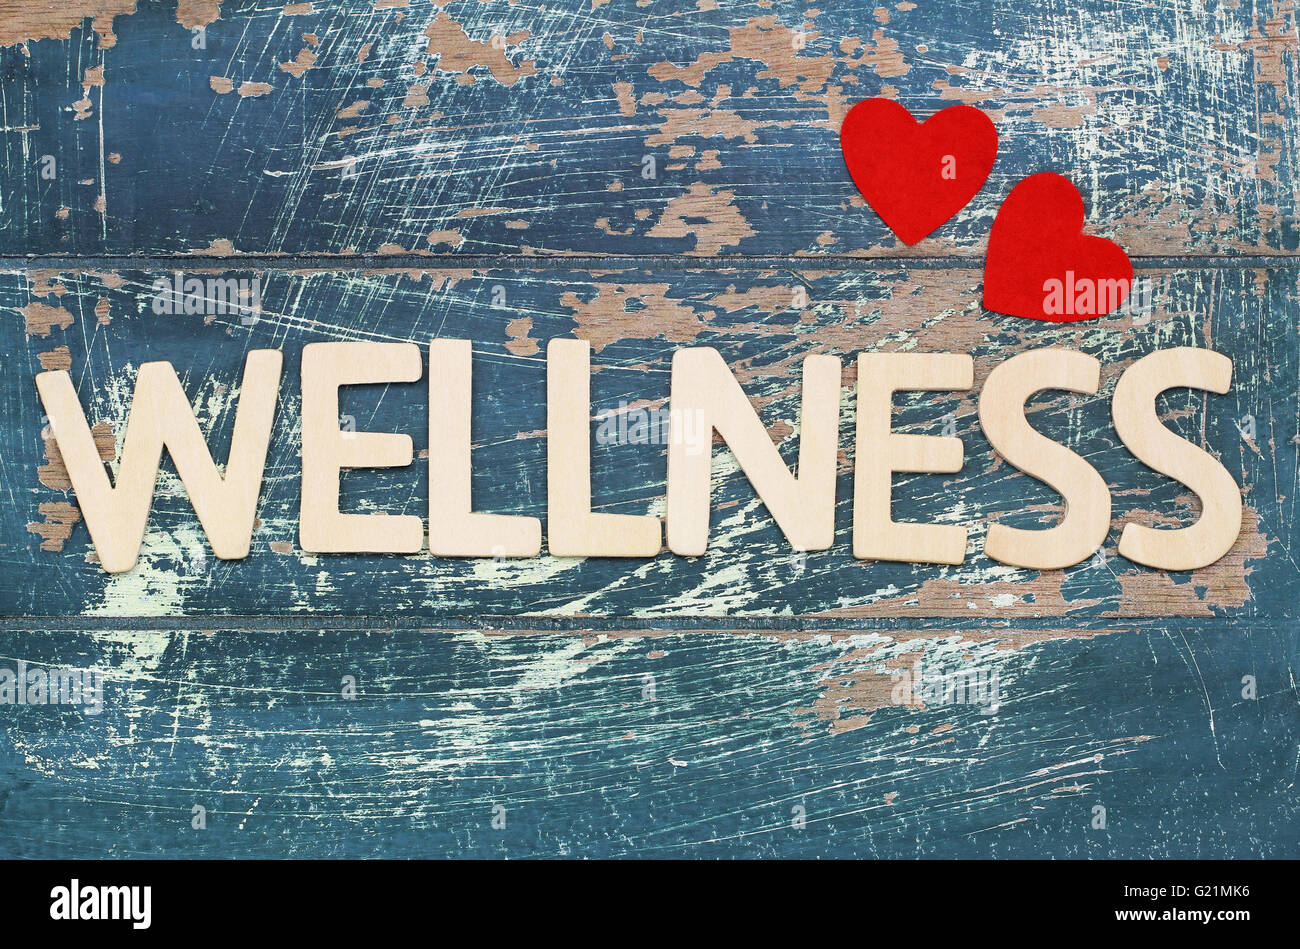 Wellness written with wooden letters on rustic surface and red hearts Stock Photo